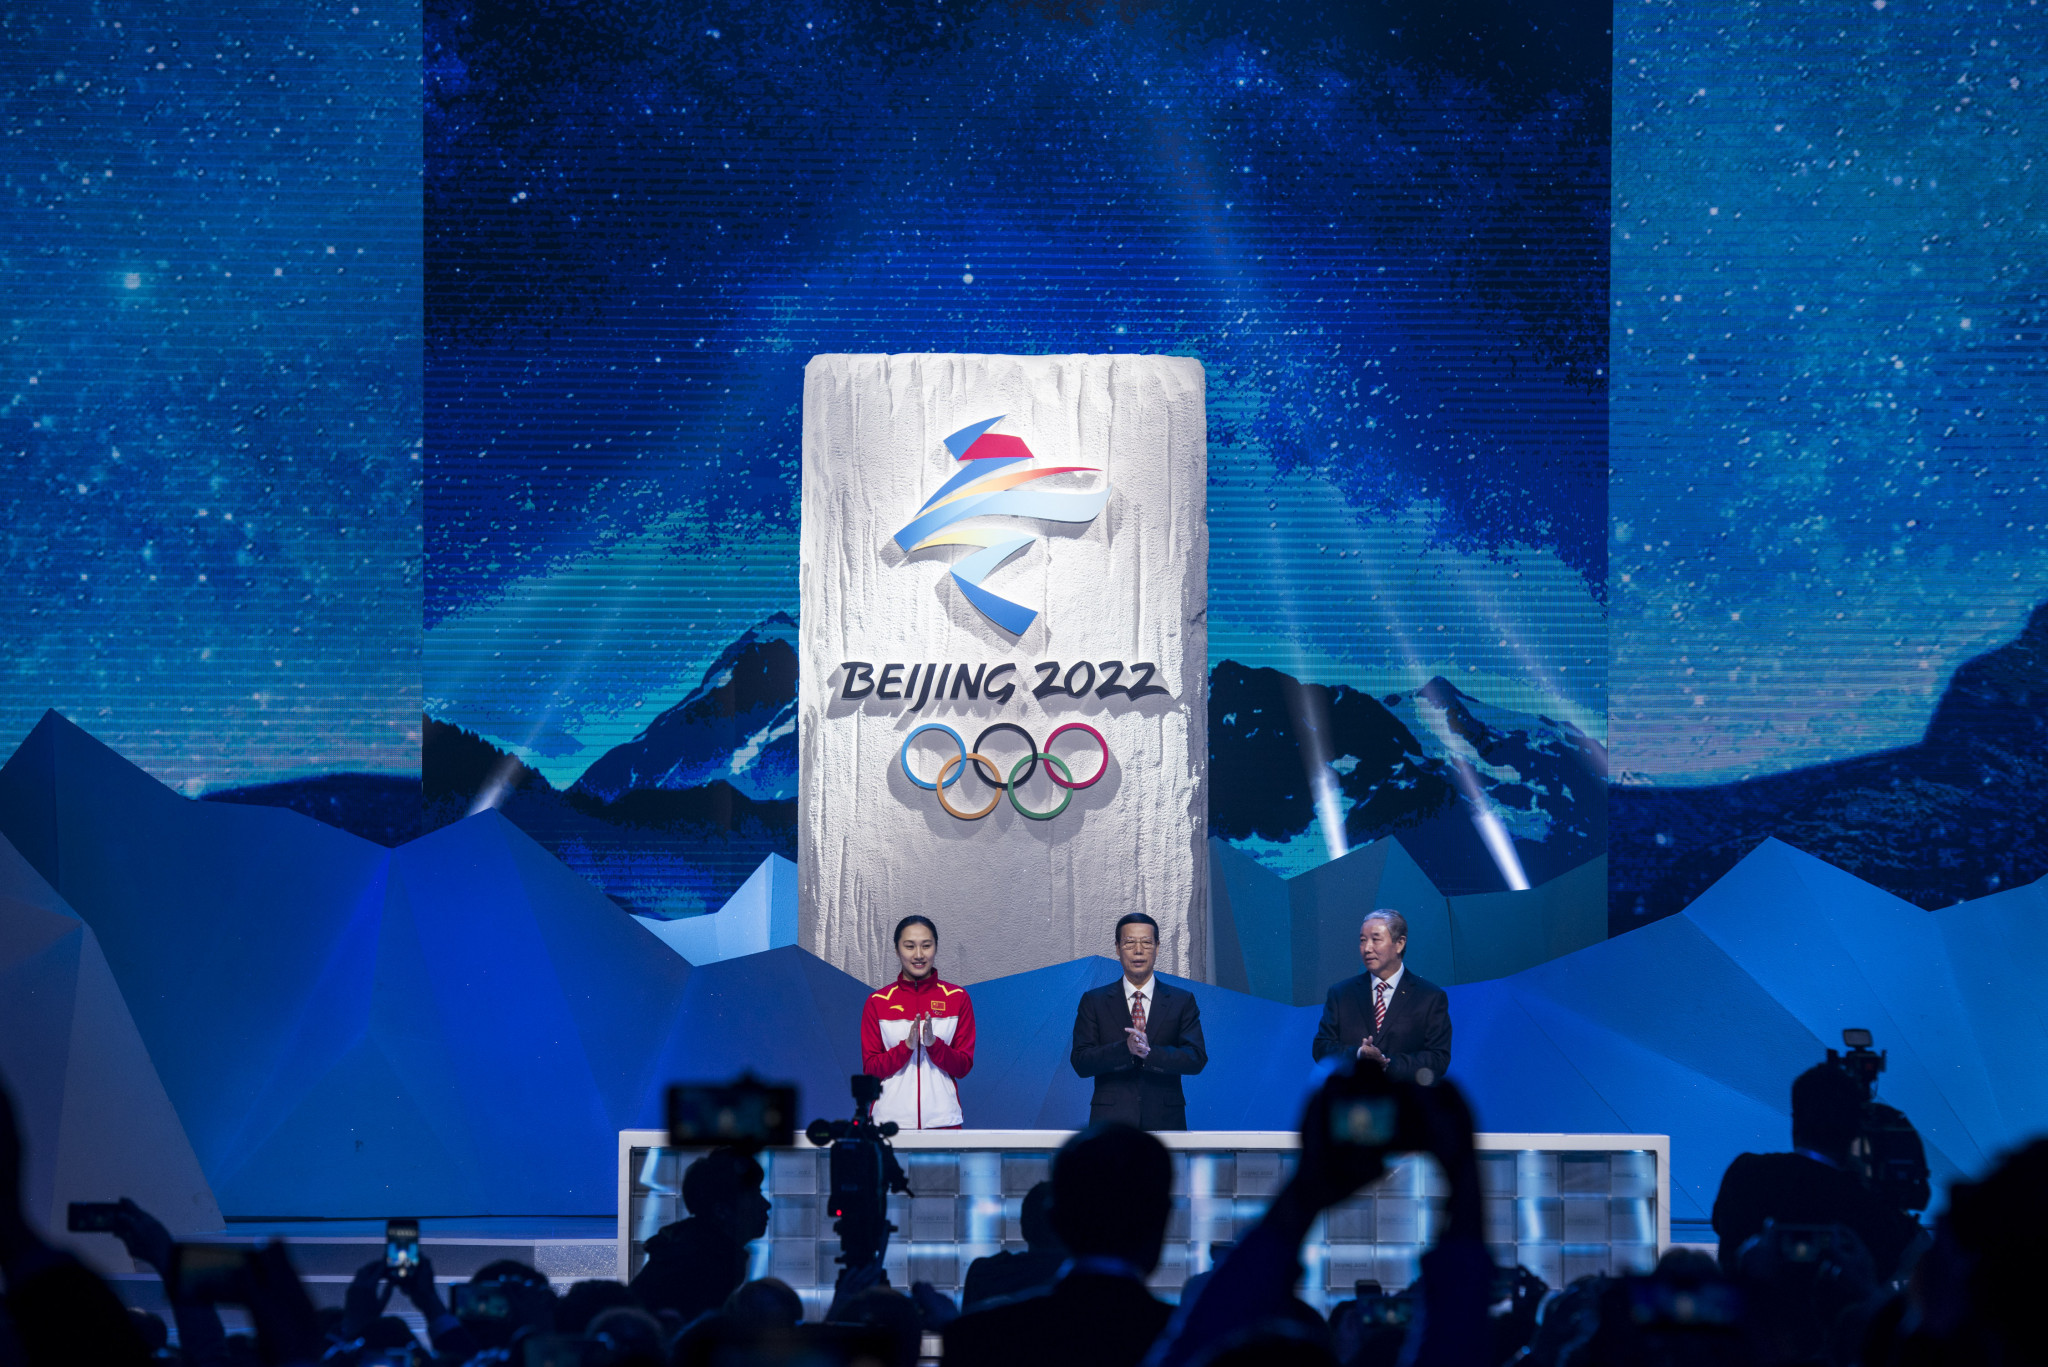 Logos revealed for Beijing 2022 Winter Olympics and Paralympics